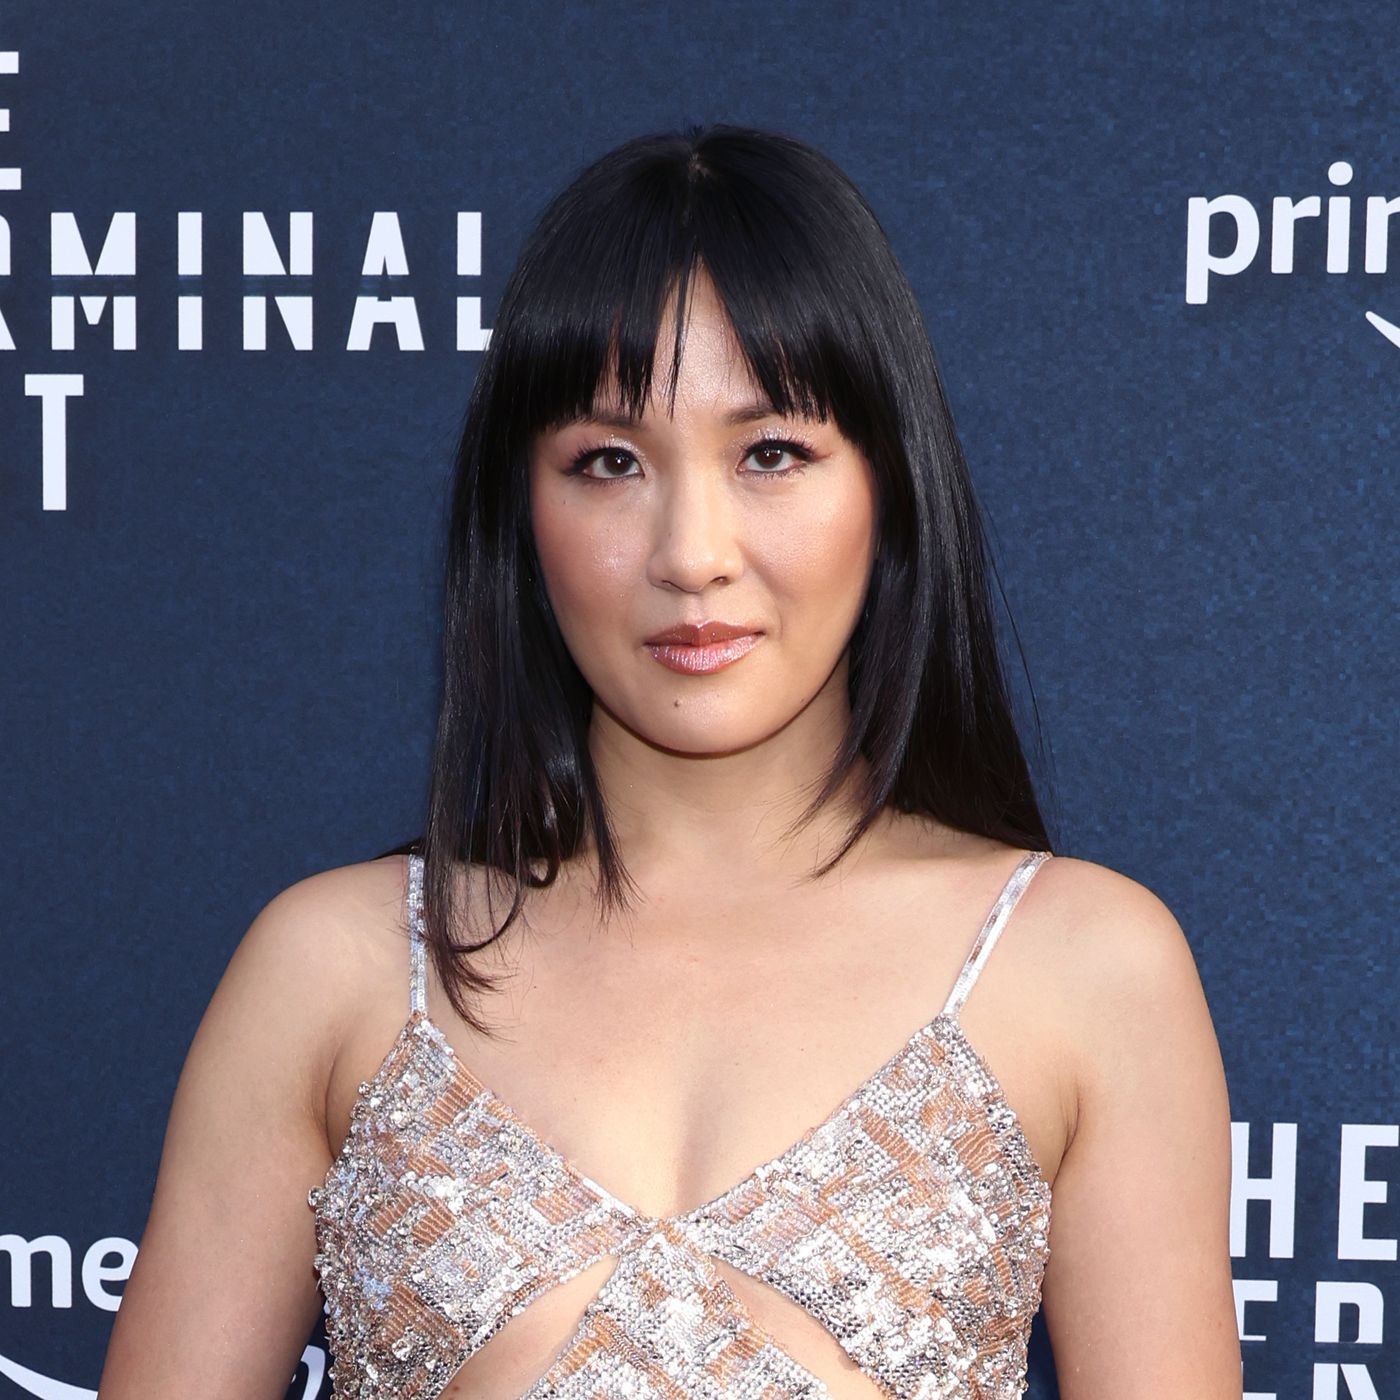 Constance Wu's 'Making a Scene': Most Revealing Moments